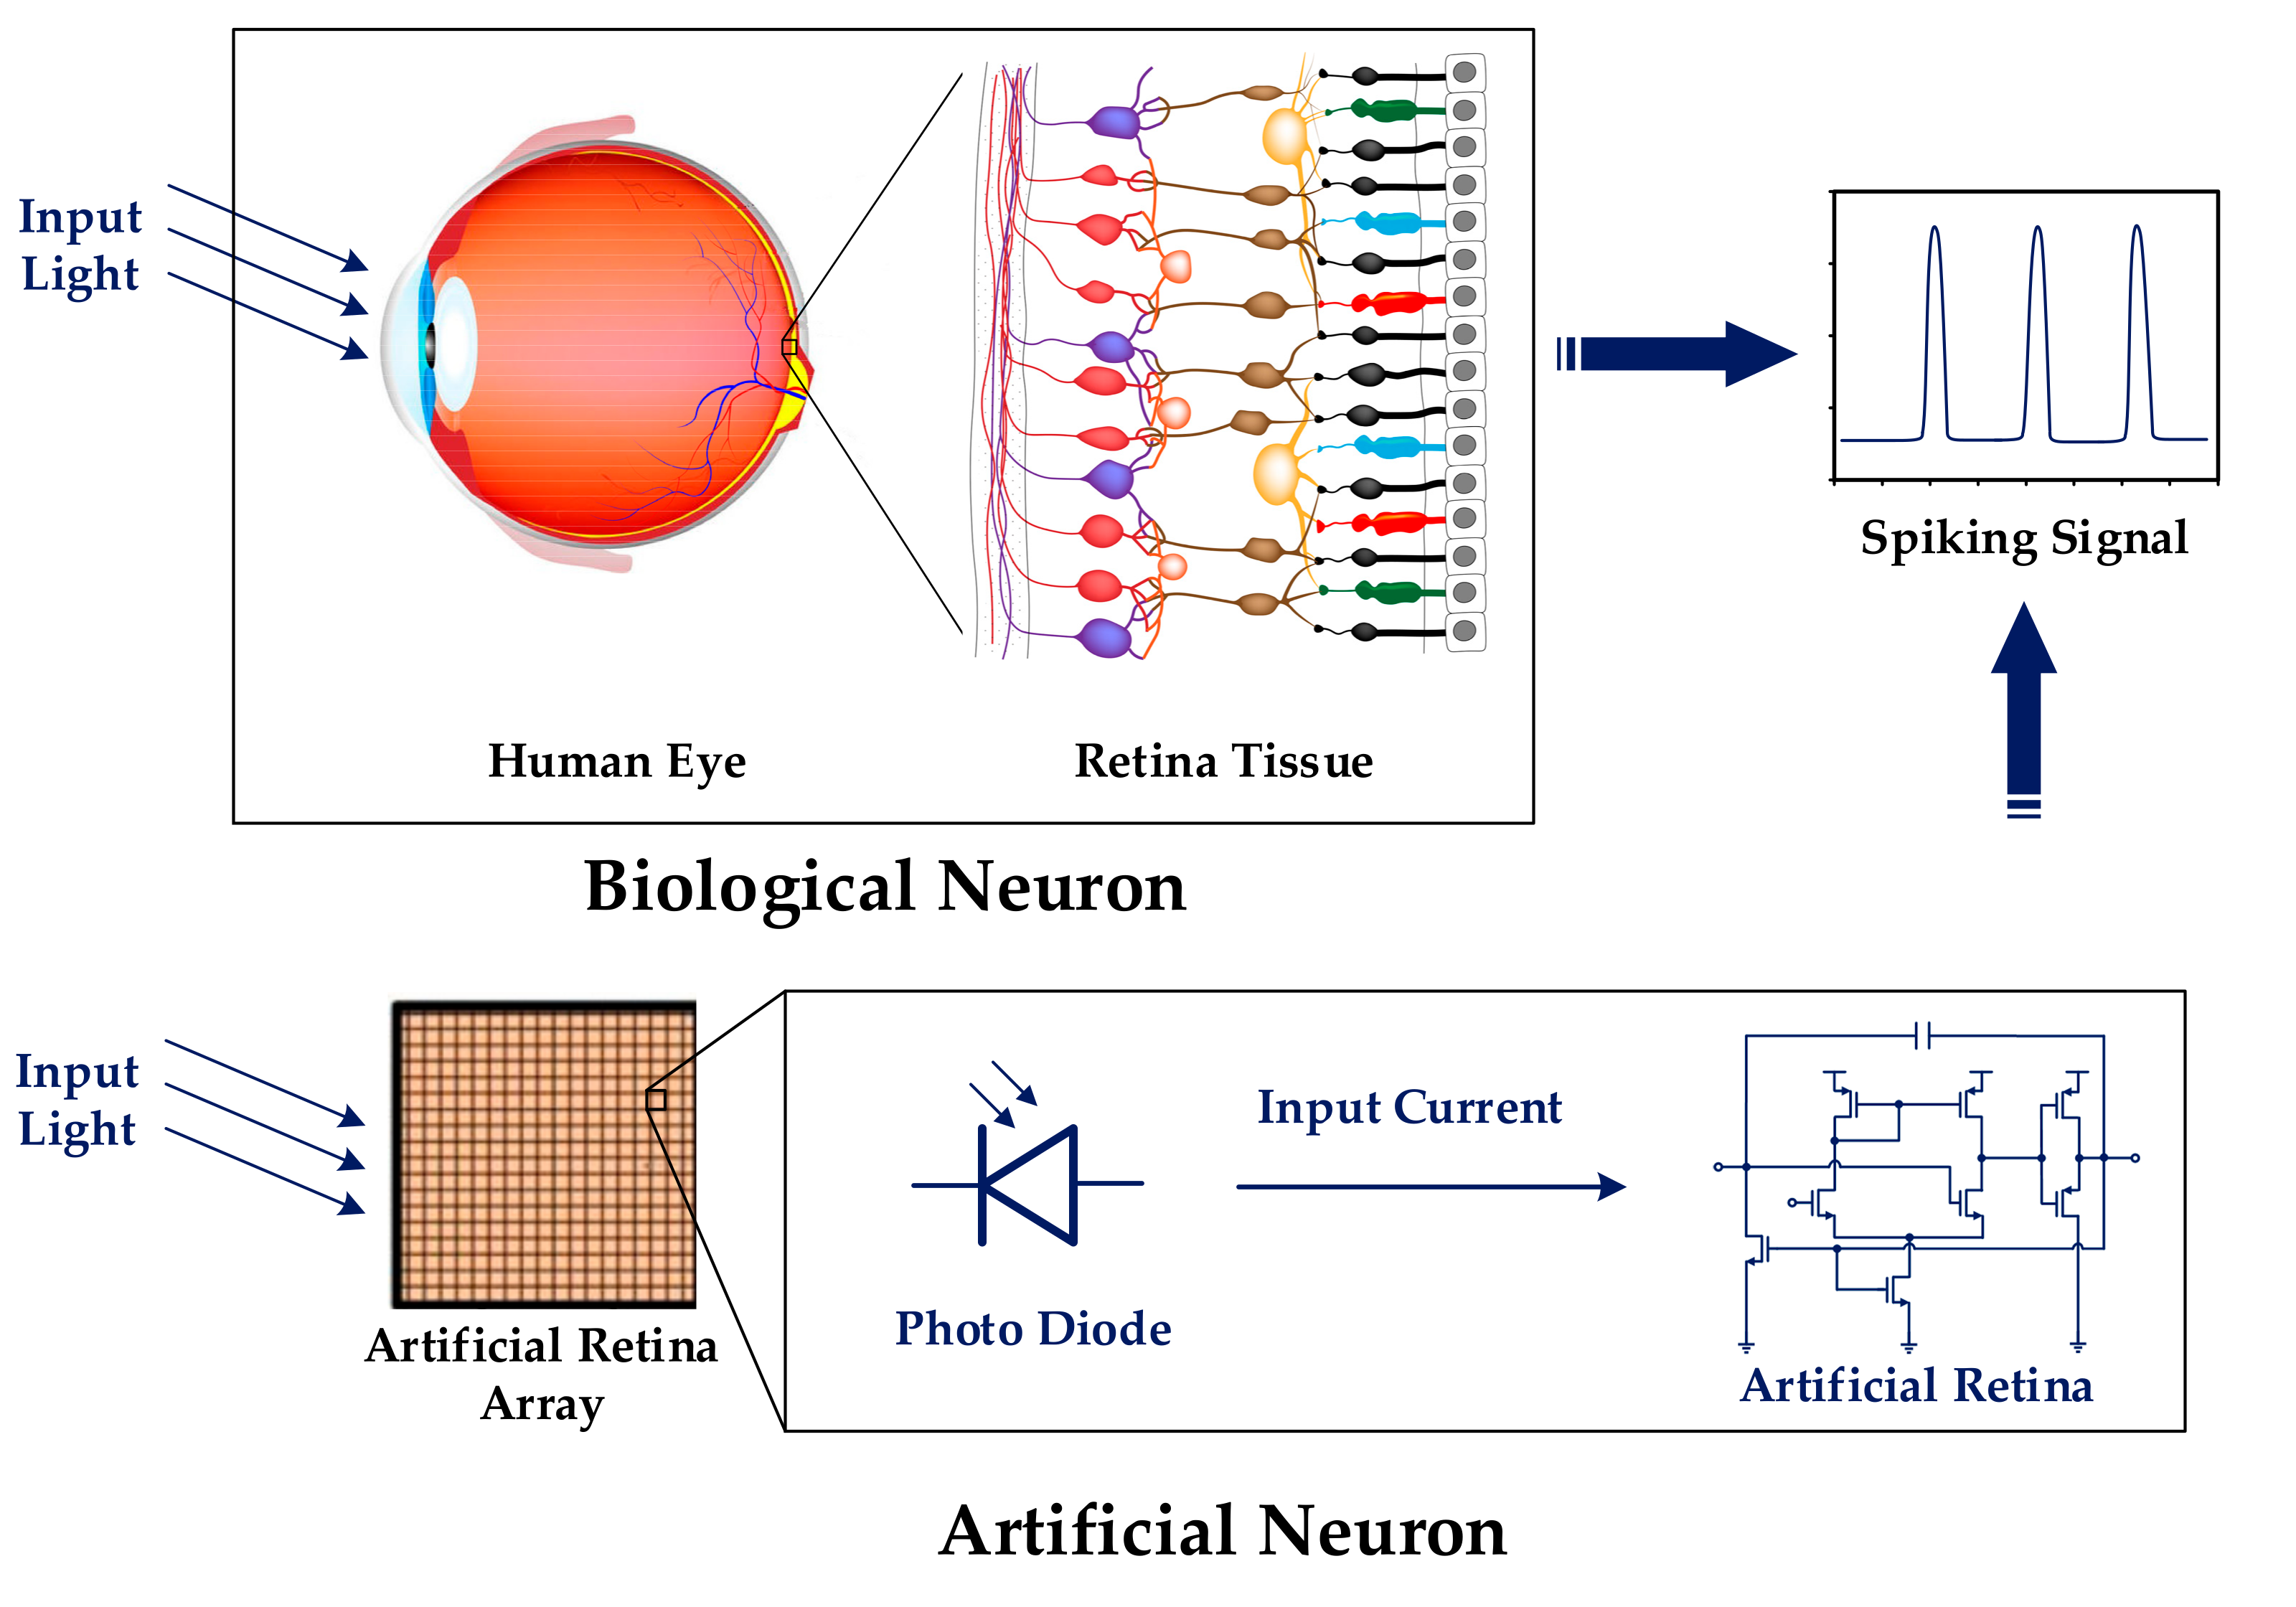 Retinal Variables for Visual Encoding – The Art of Data